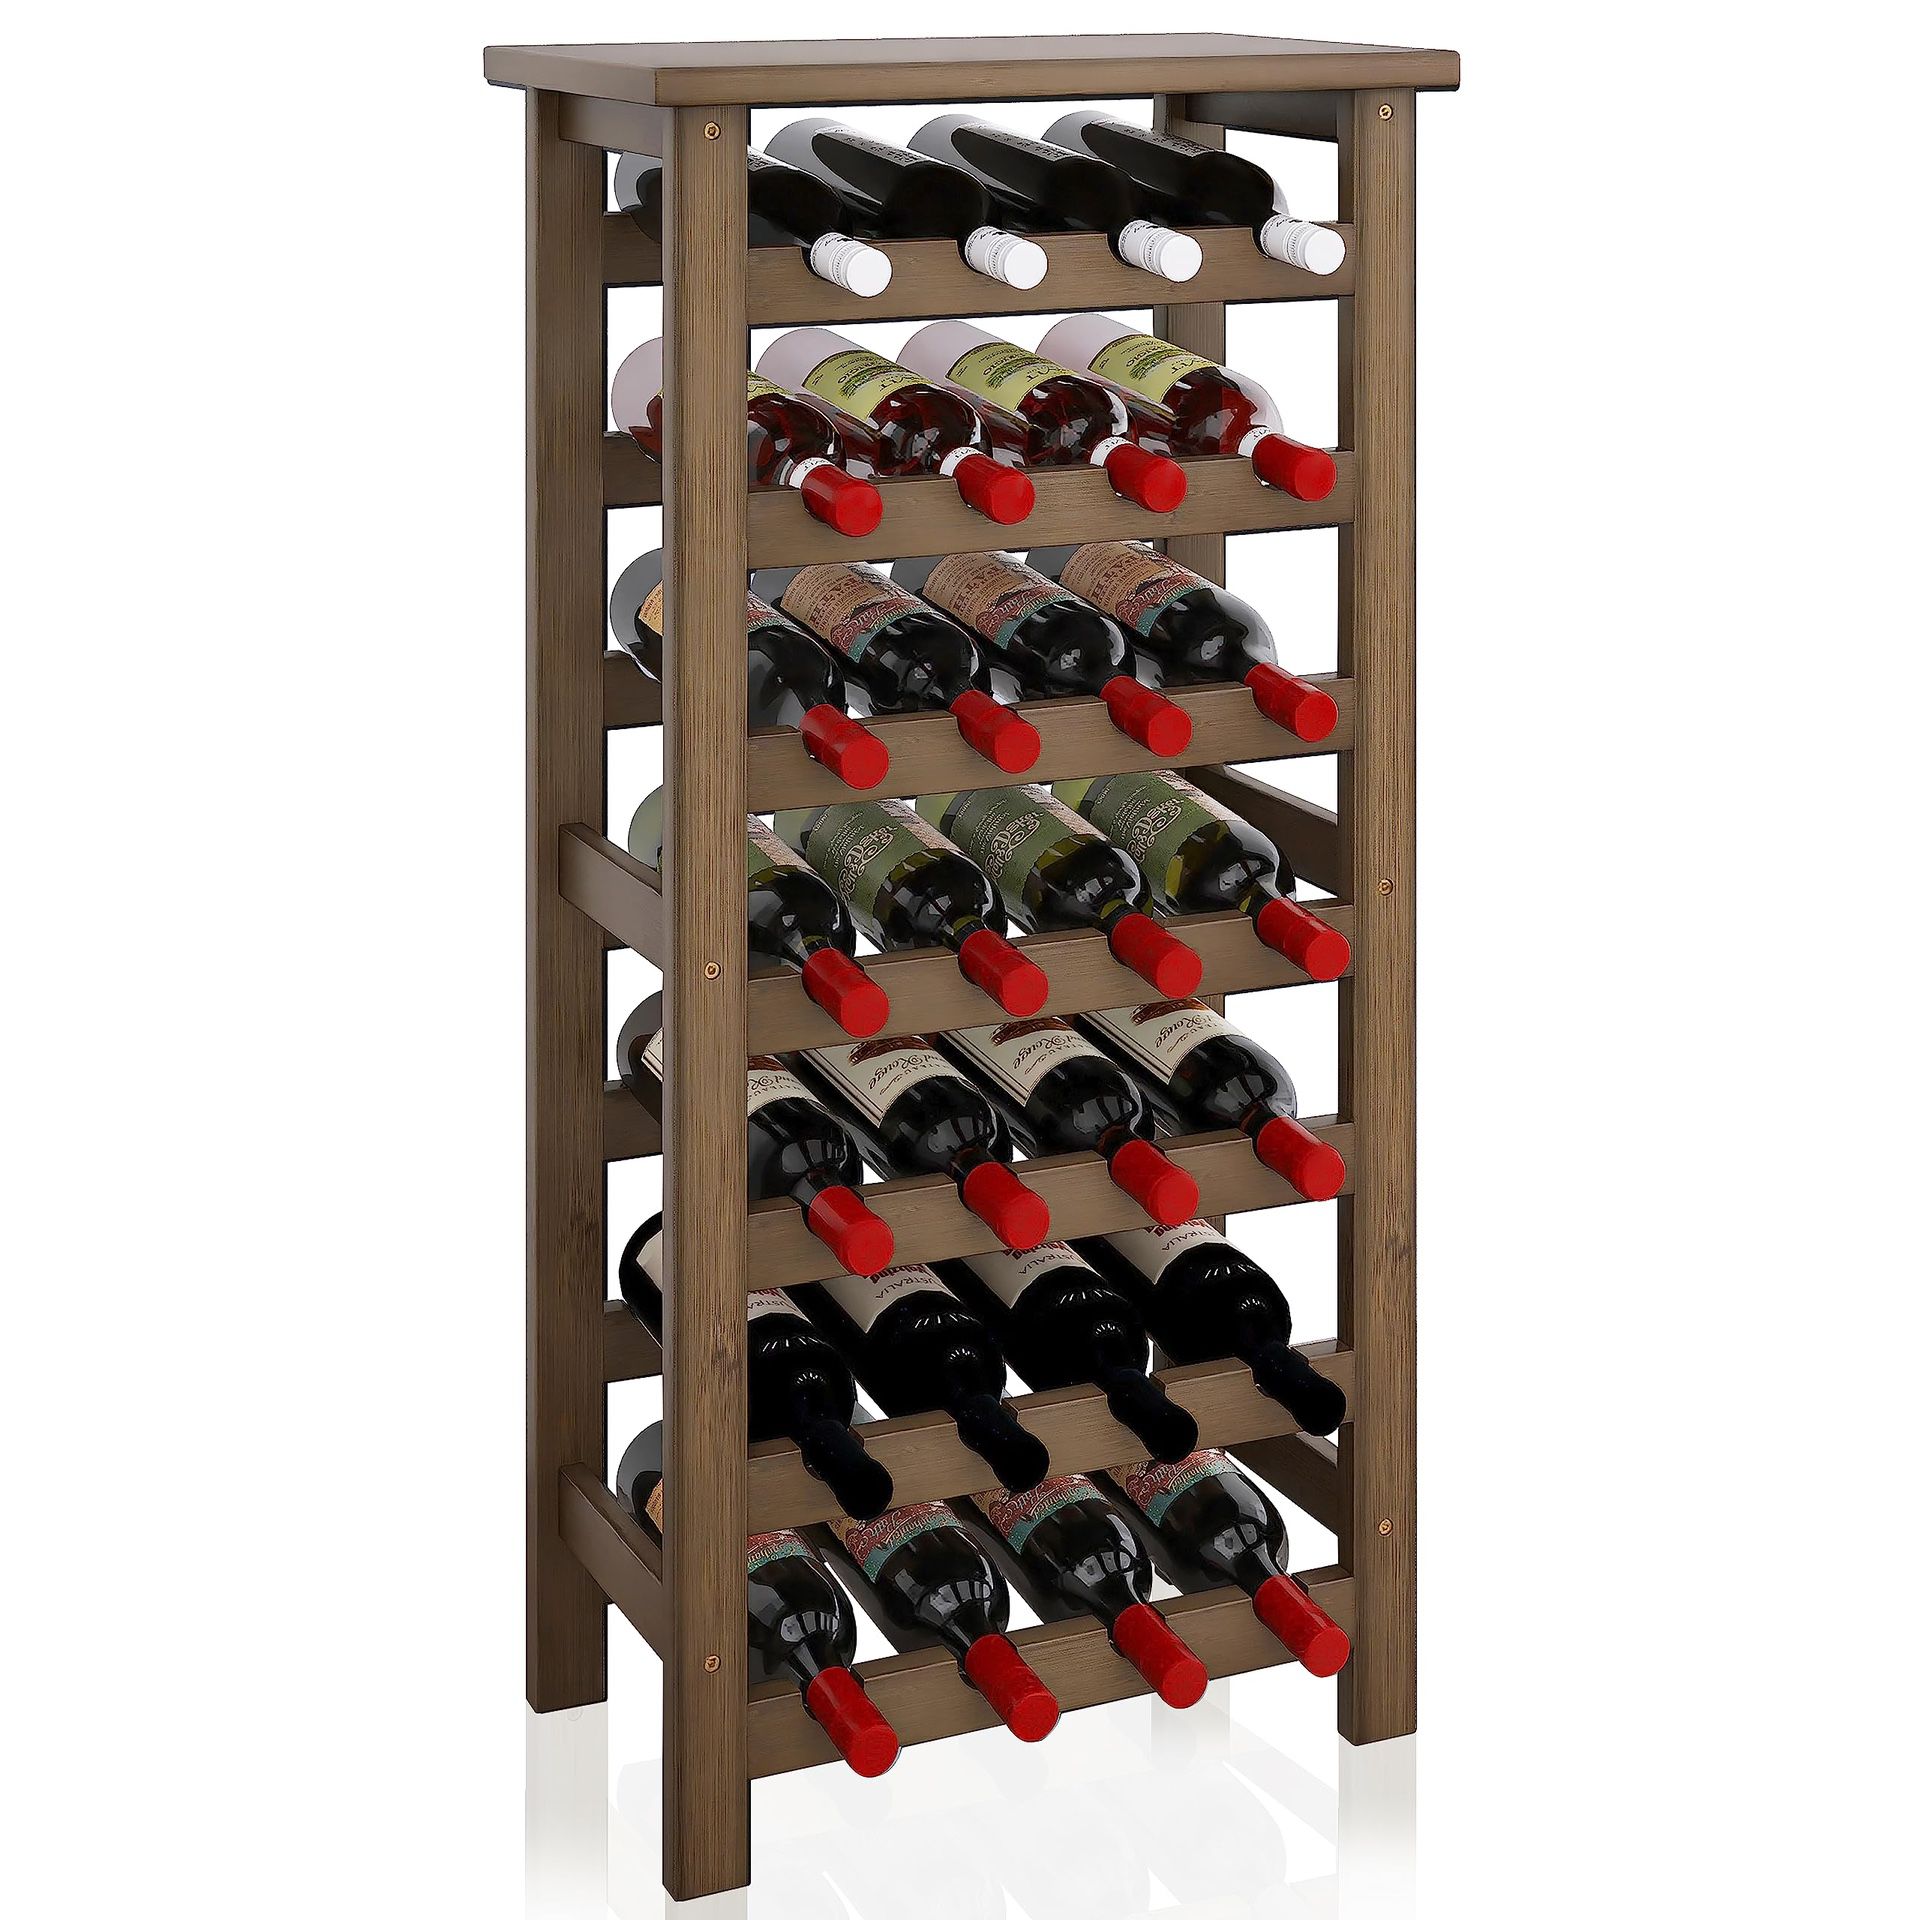 SMIBUY Bamboo Wine Rack, 28 Bottles Display Holder With Table Top, 7-Tier Free Standing Storage Shelves For Kitchen, Pantry, Cellar, Bar (Walnut)